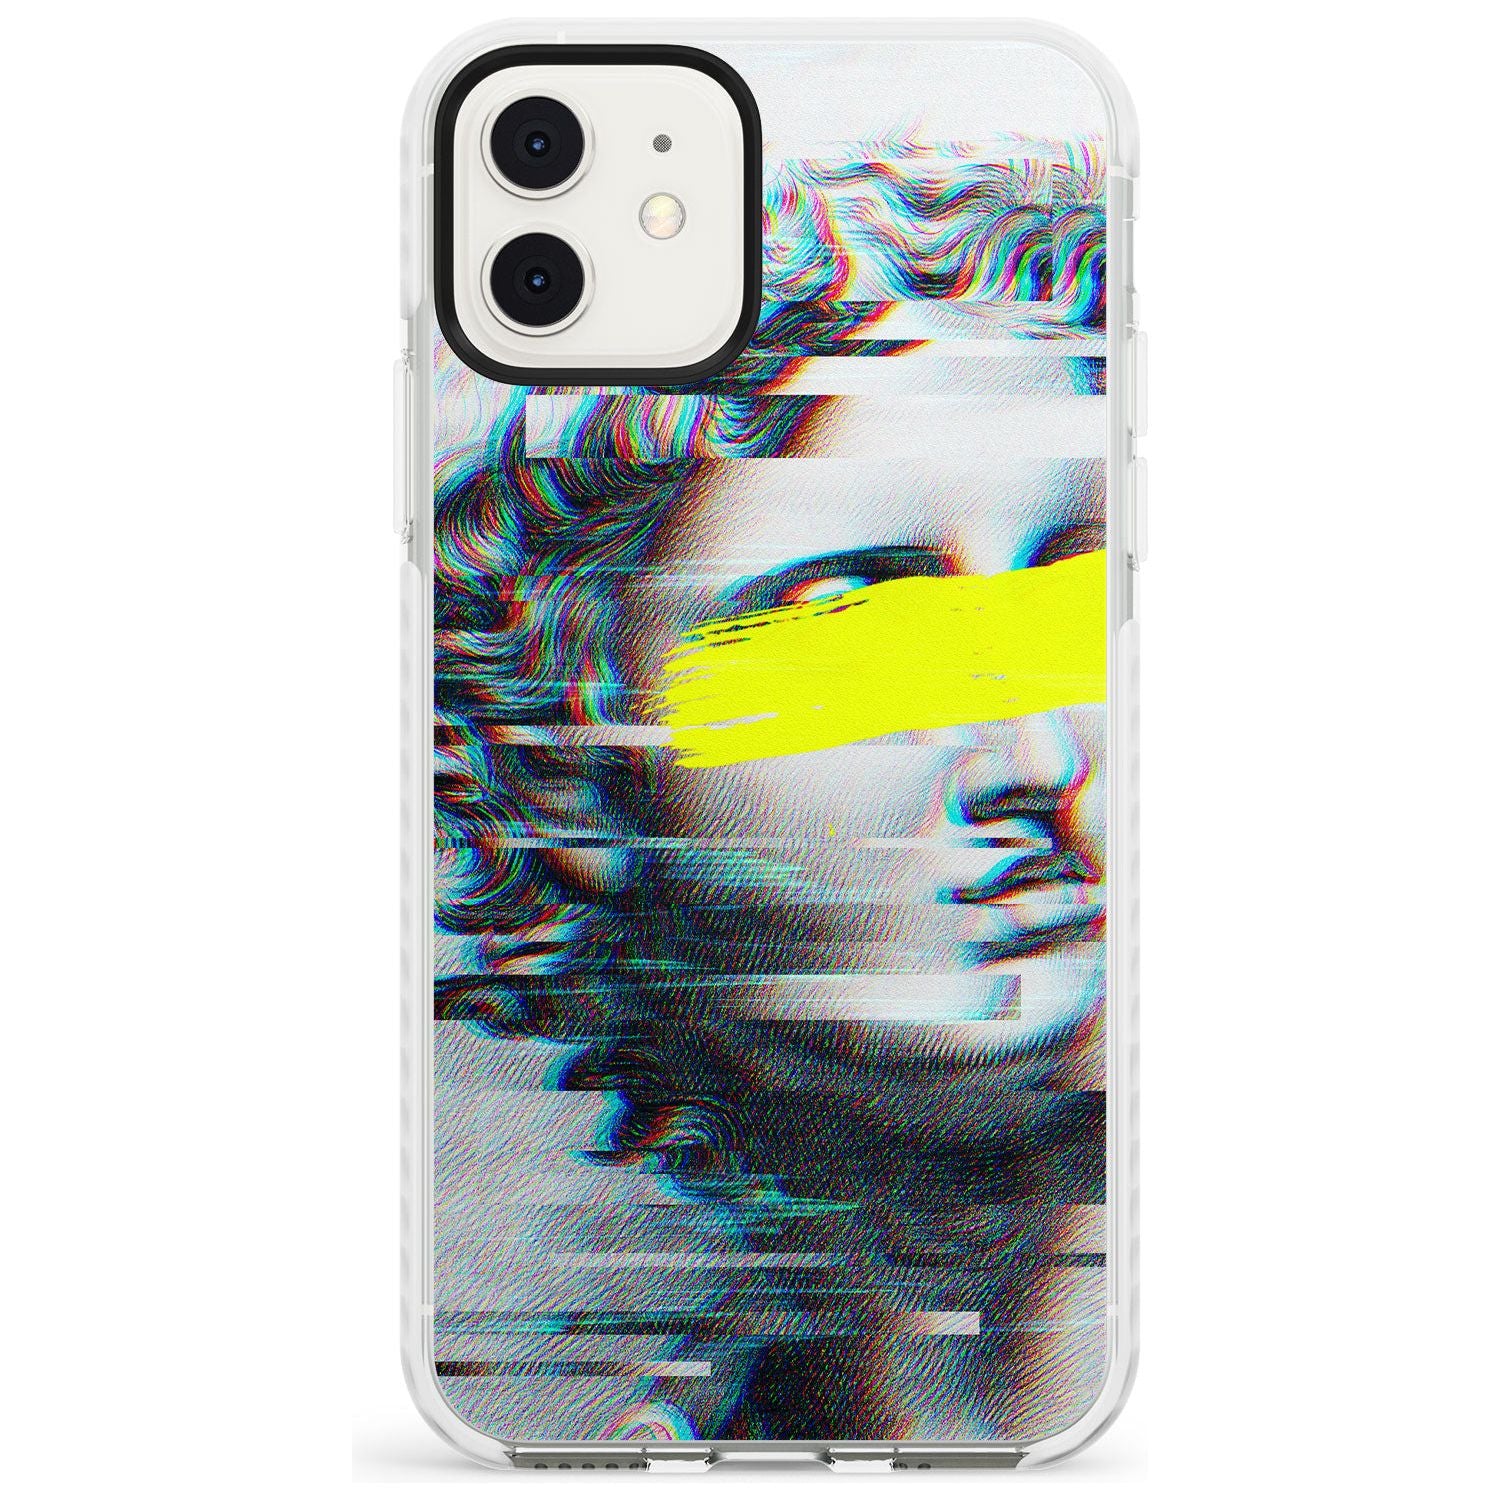 GLITCHED FRAGMENT Slim TPU Phone Case for iPhone 11